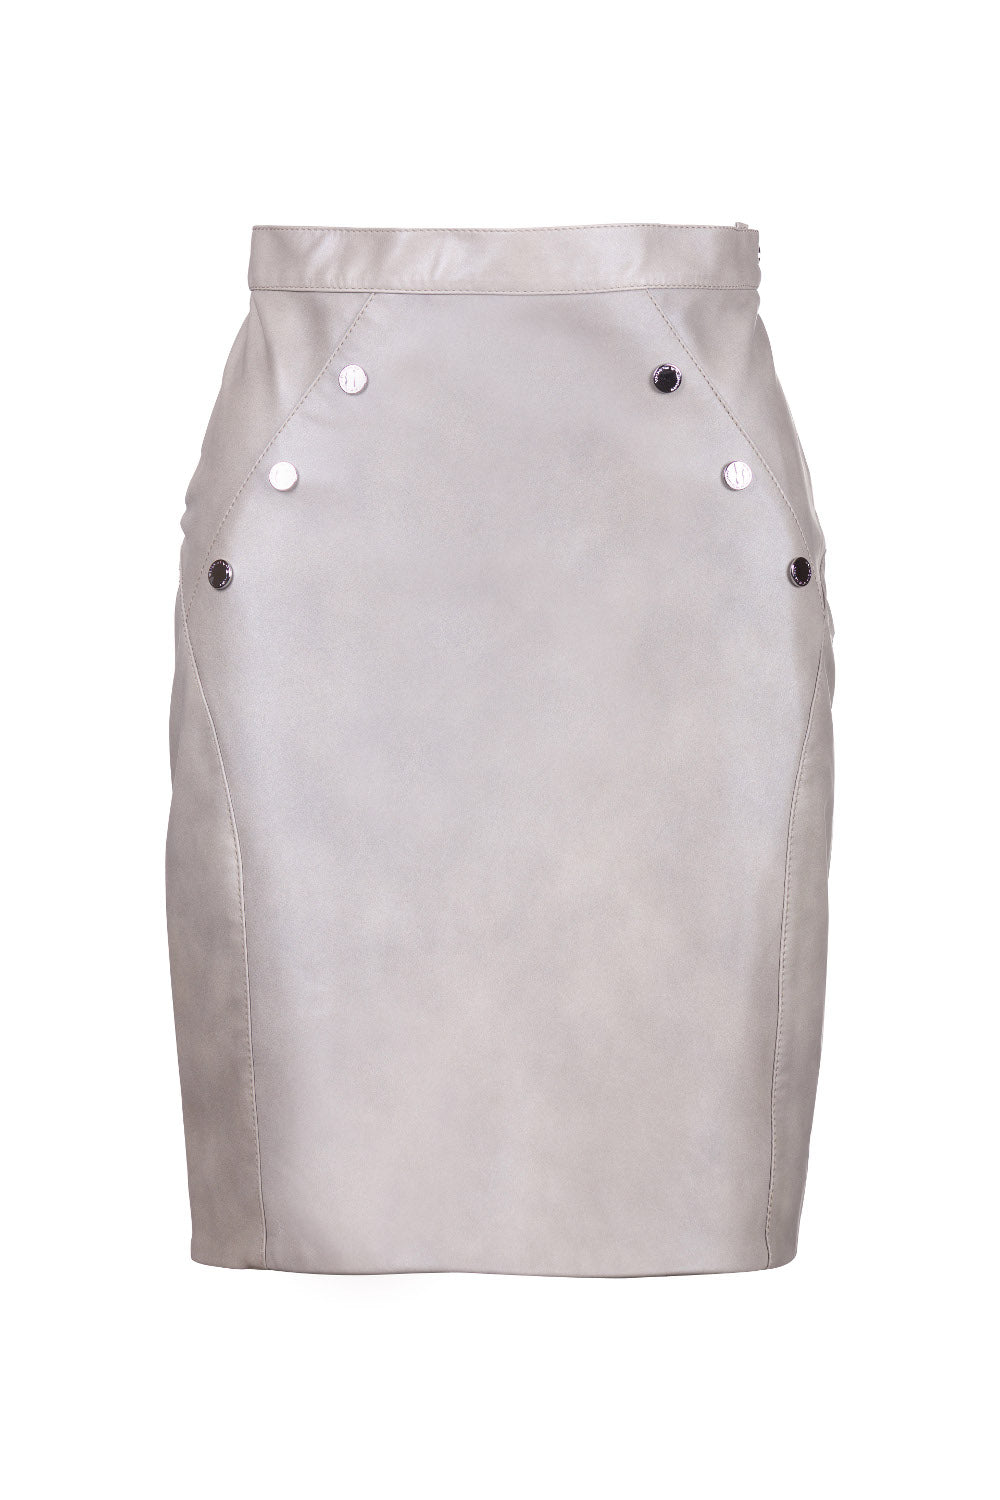 Merino Wool Tailored Reindeer Leather Skirt- Limited Edition